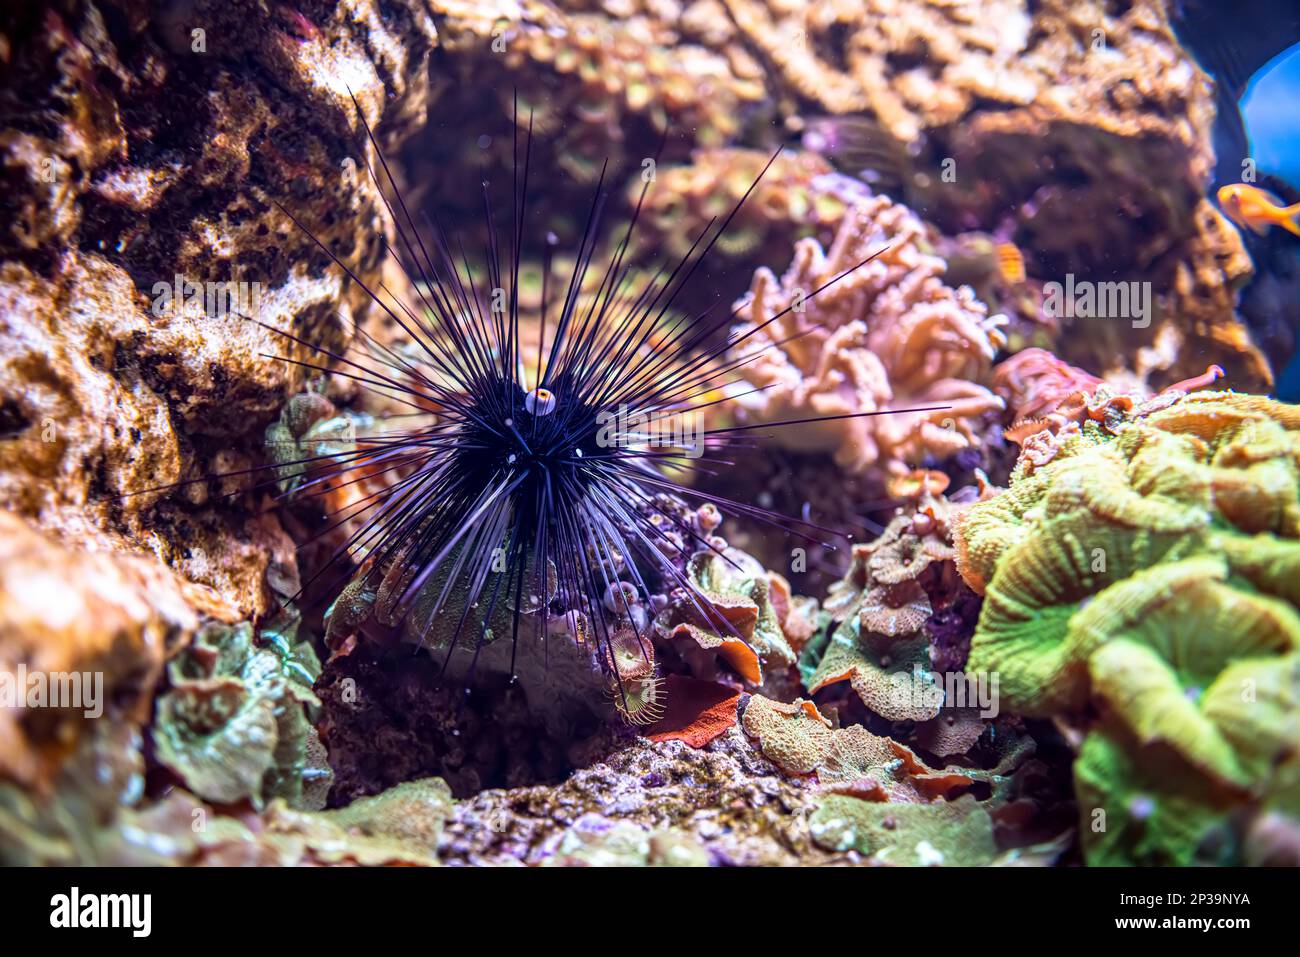 Black long spine urchin at coral reef. Diadema setosum is a species of long-spined sea urchin belonging to the family Diadematidae. Stock Photo